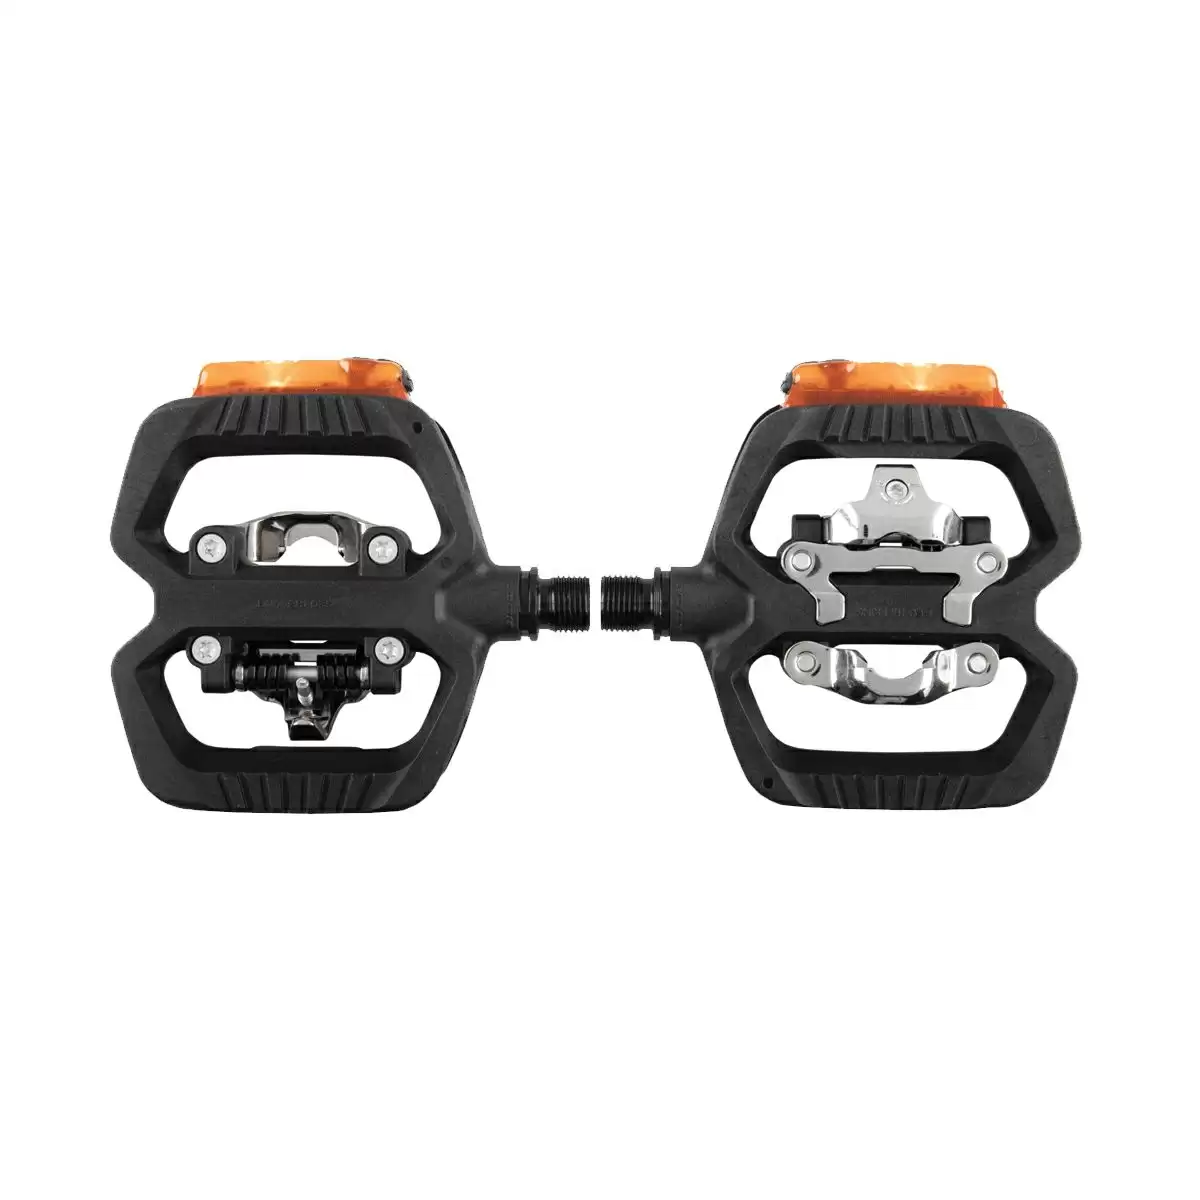 Double function Geo Trekking Vision light pedals 2020 - image